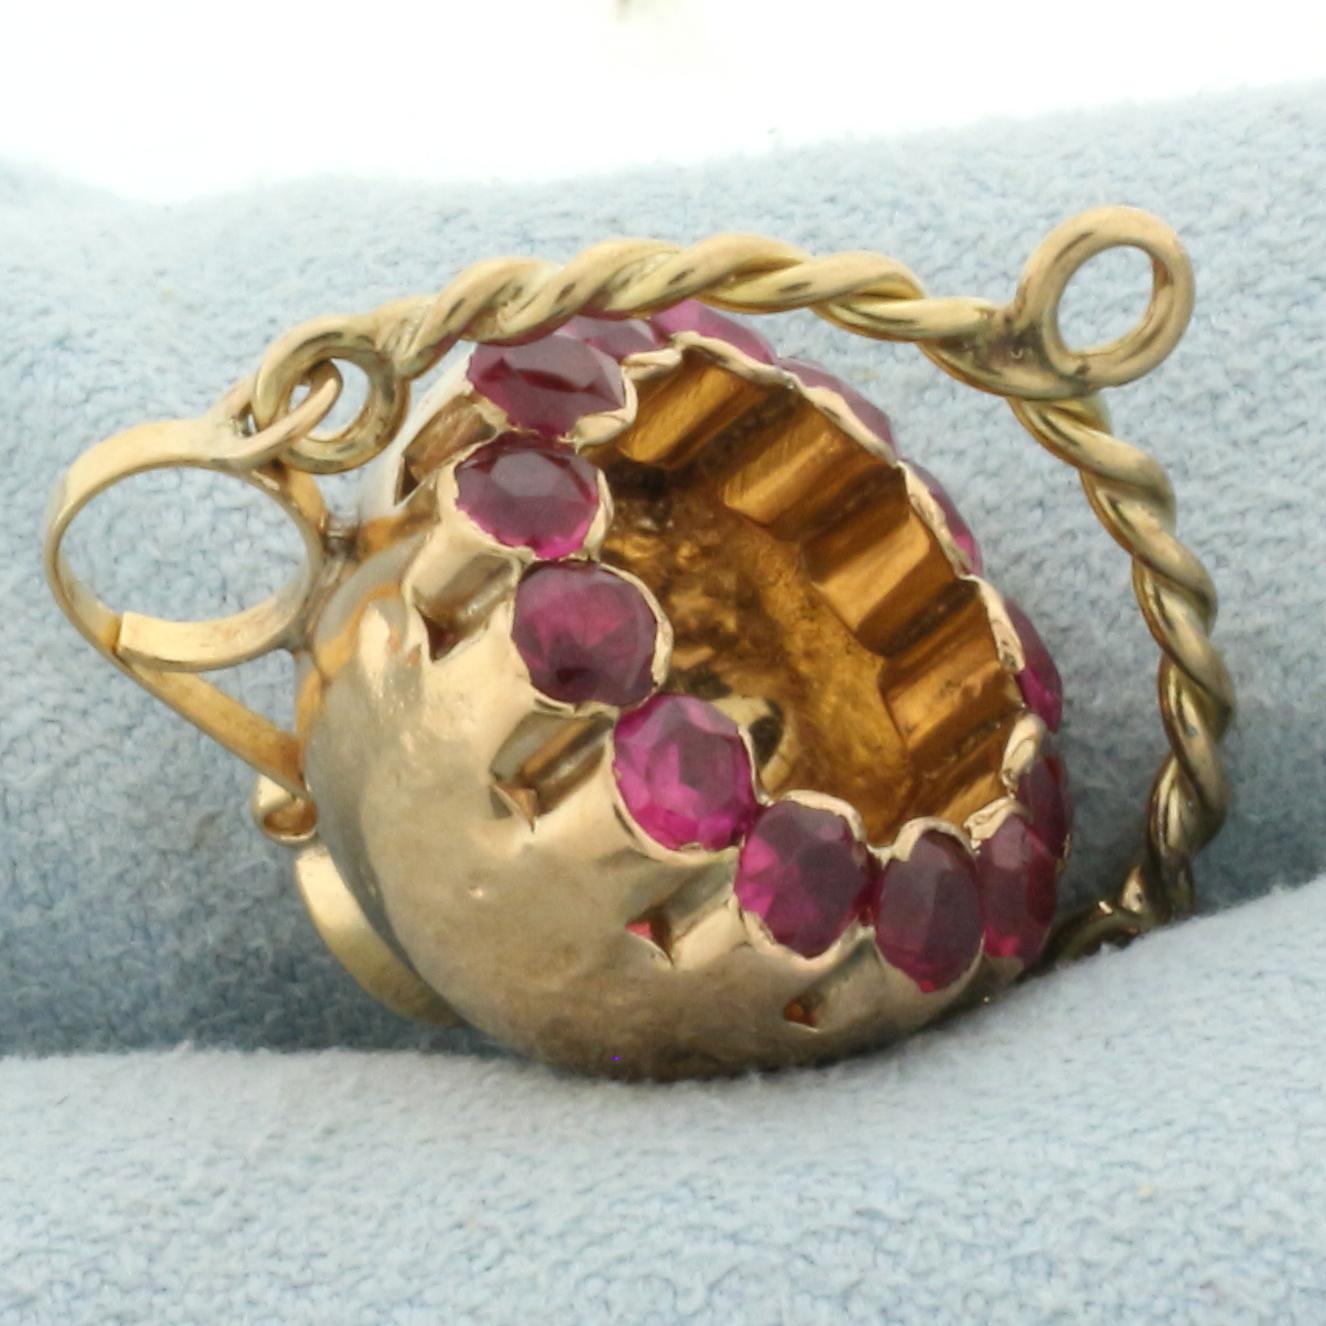 Ruby Cauldron Pendant Or Charm In 14k Yellow Gold